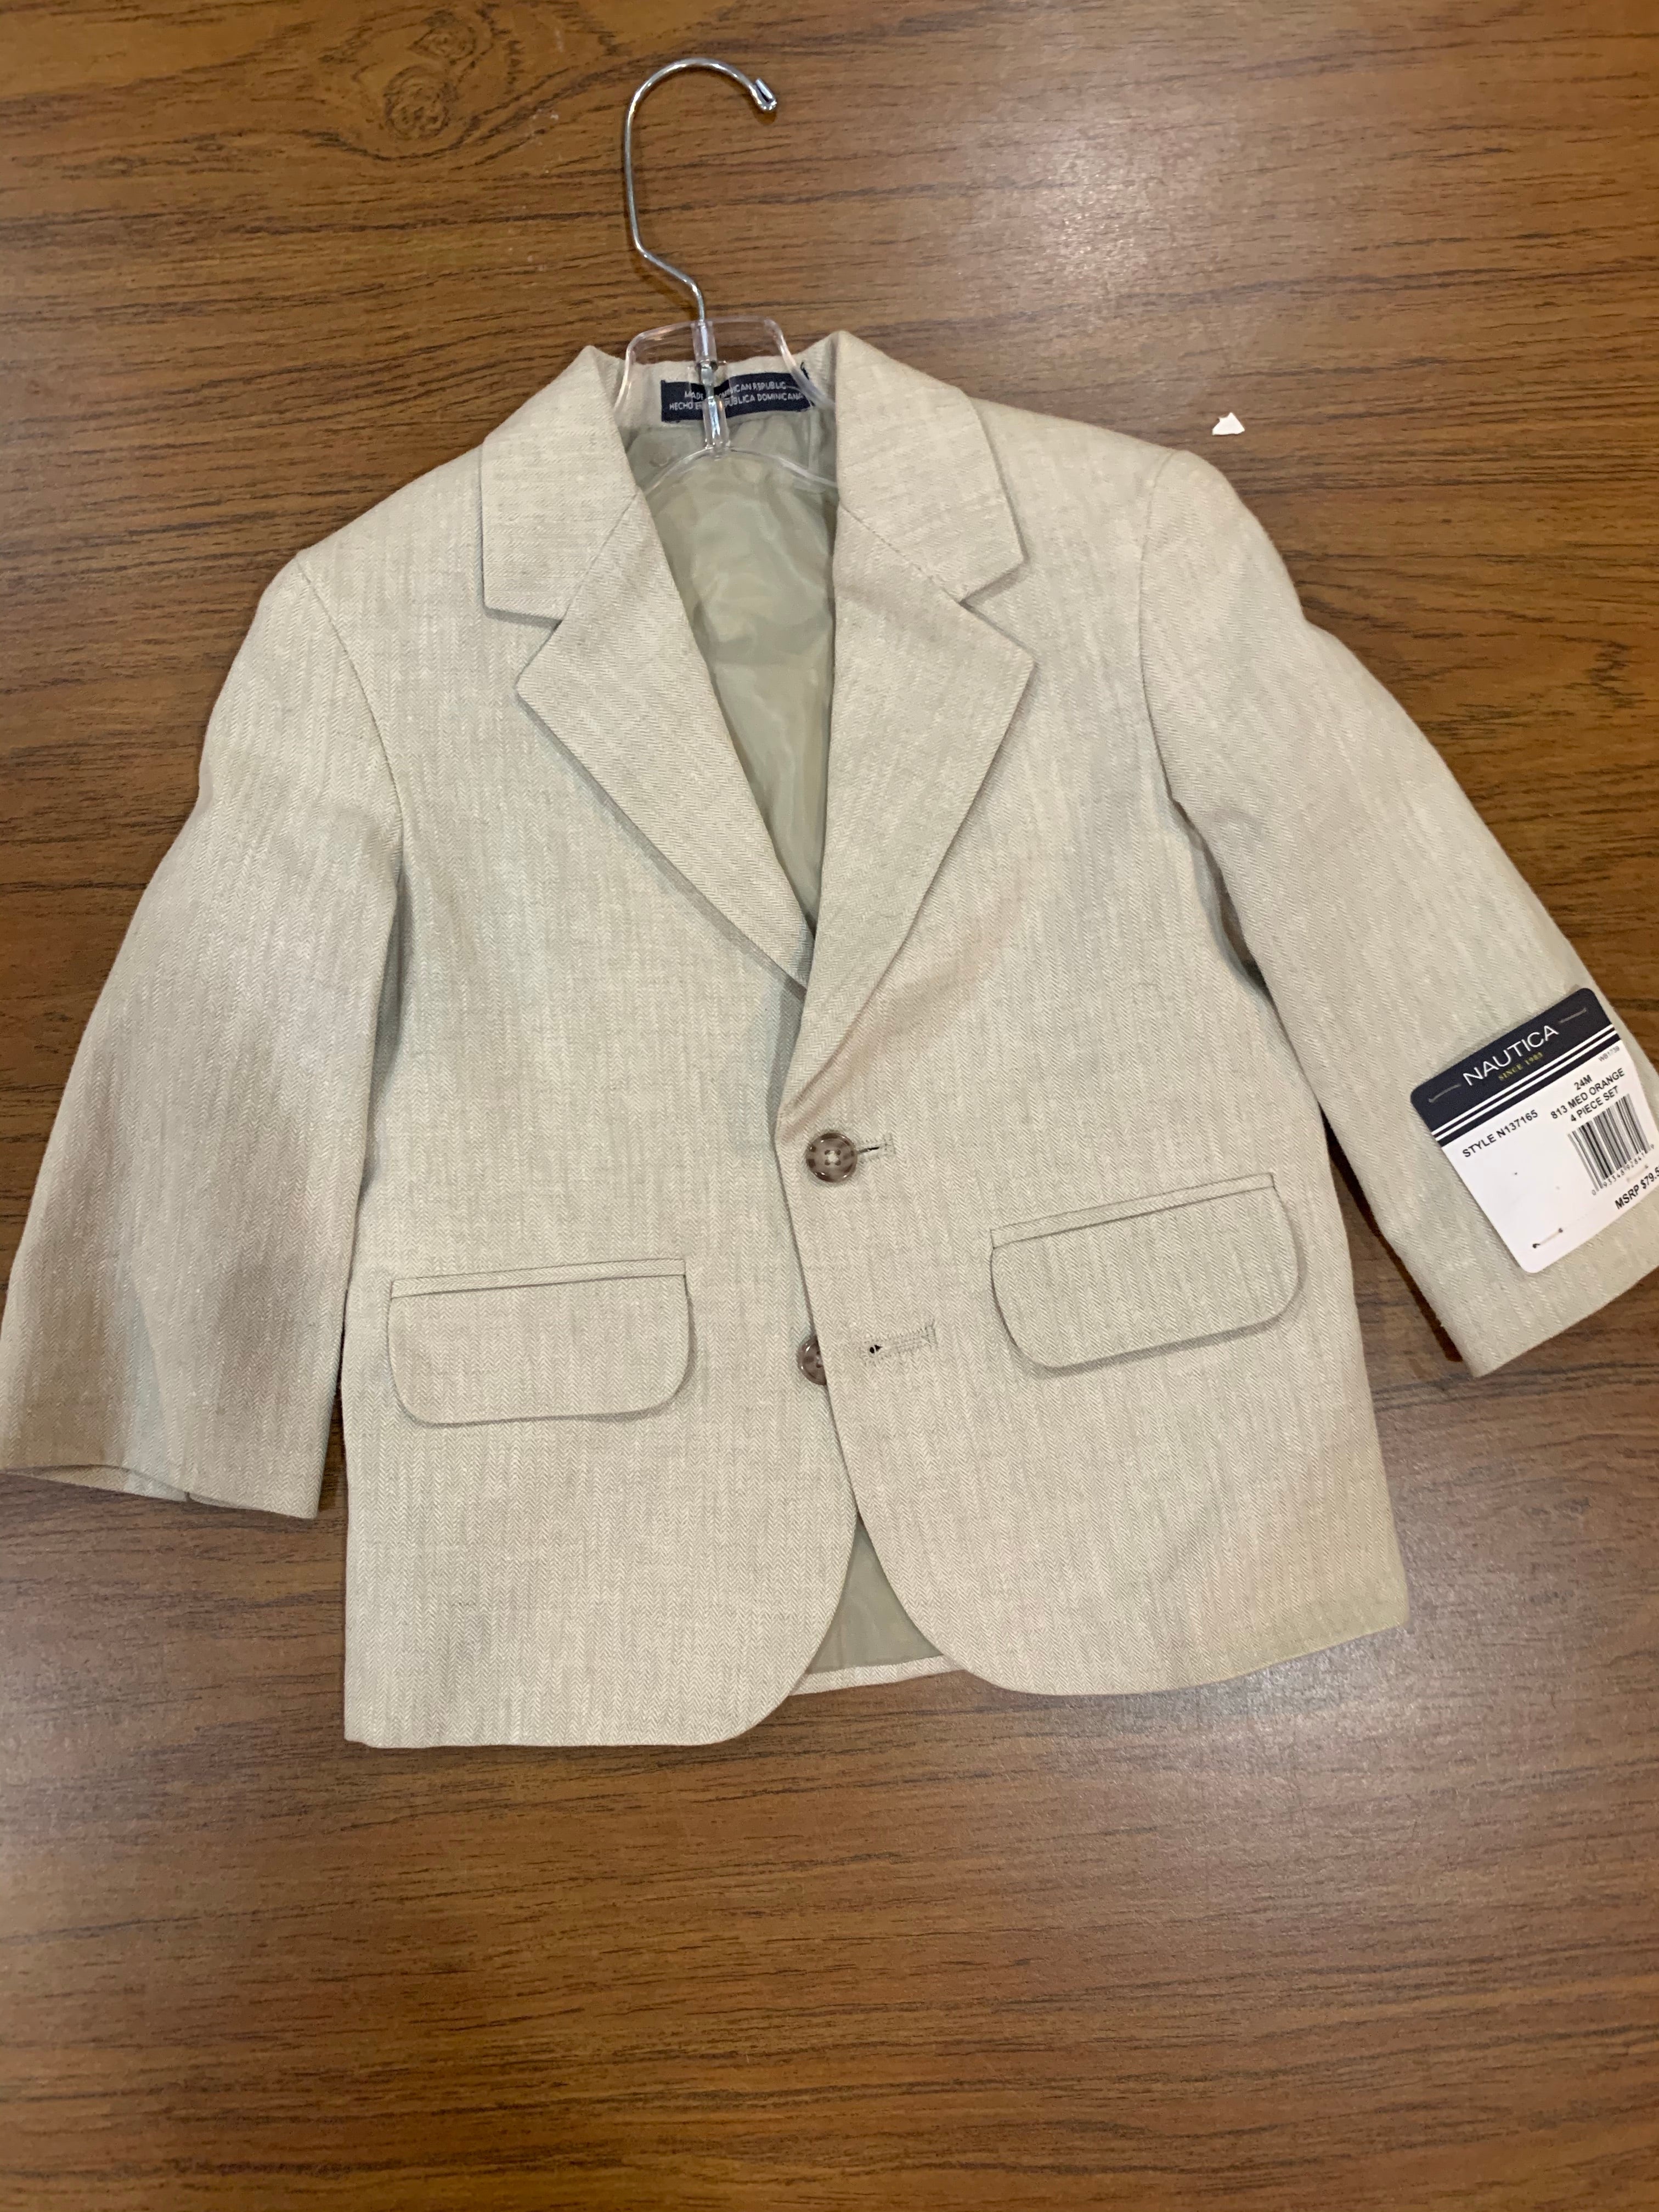 Resale nautica new with tag sport coat 24 months